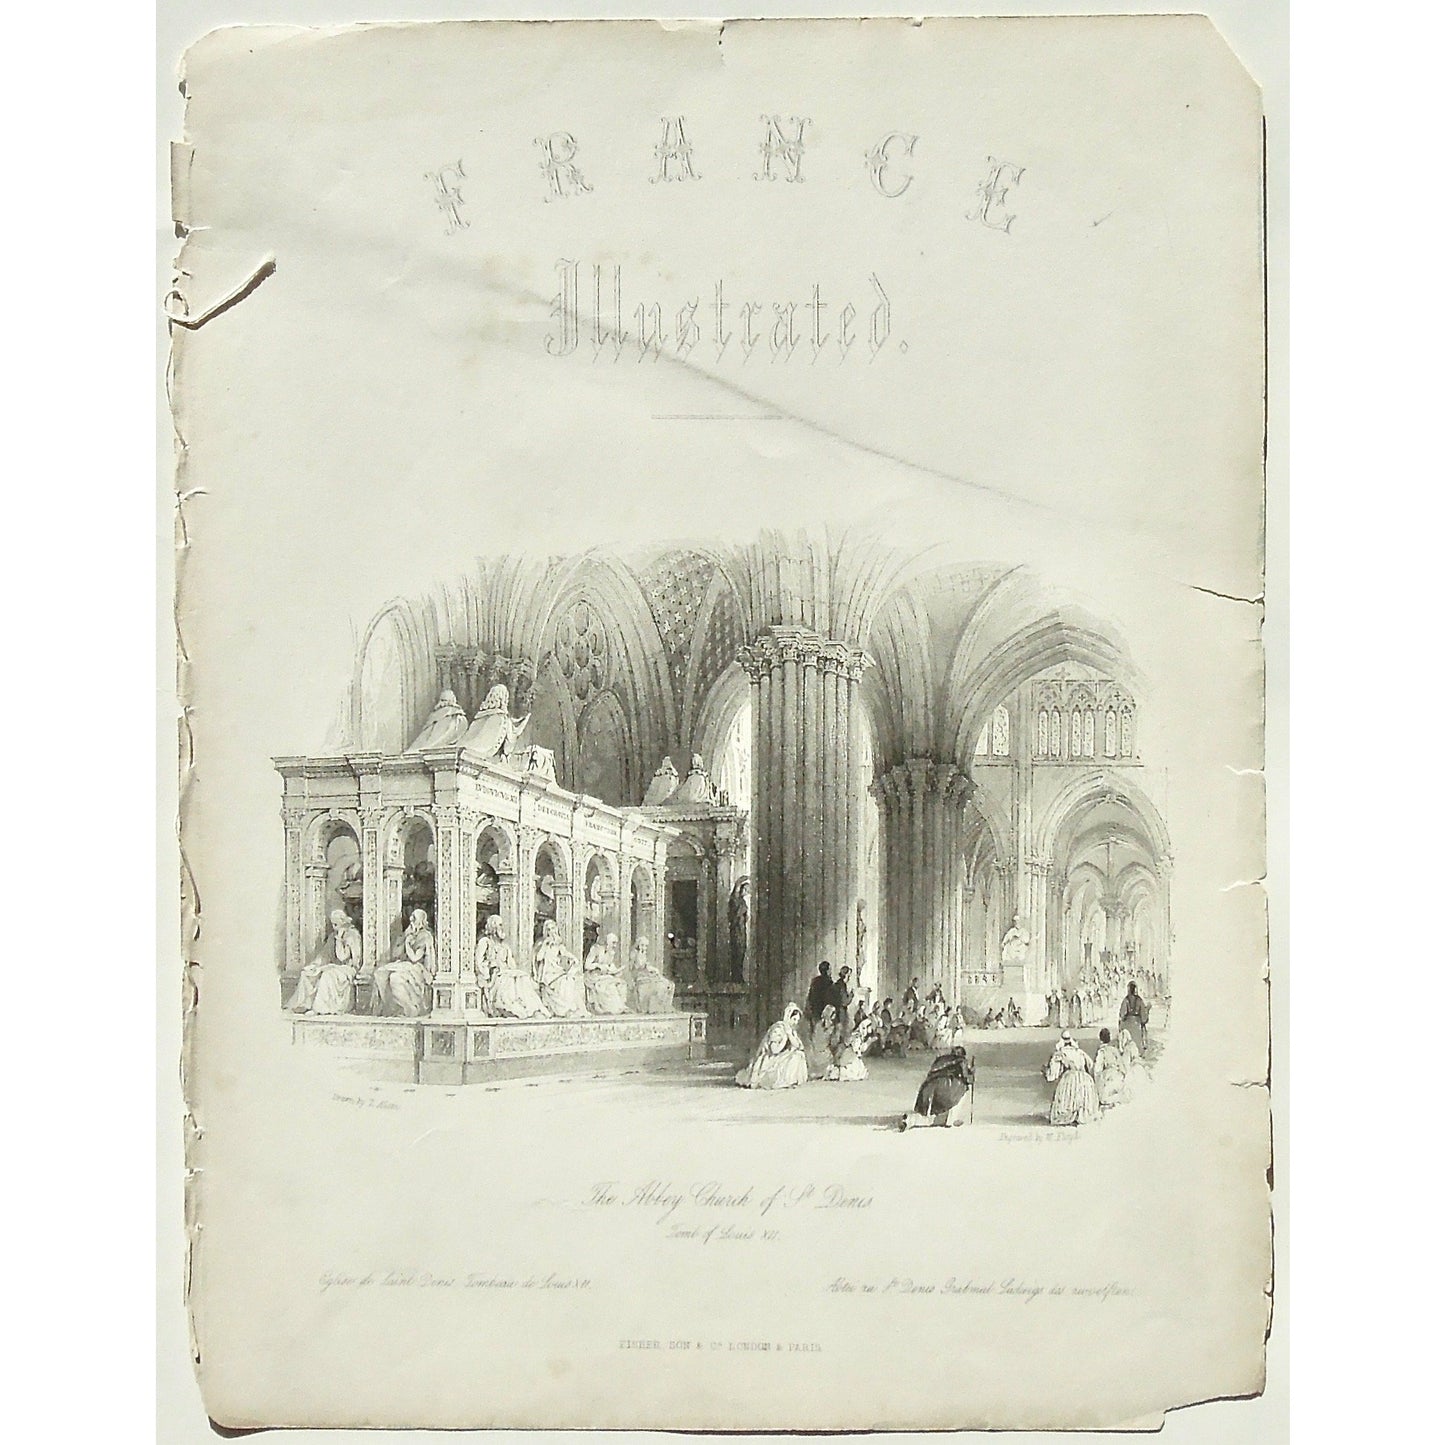 France, France Illustrated, Abbey, Church, Abbey Church of St. Denis, St. Denis, Tomb of Louis XI, Tomb of Louis 11, Louis 11th, Tomb, Pulpit, prayer, Prayers, praying, Pray, devoted, Kneeling, worship, worshiping, worshippers, Interior, Church Interior, Abbey interior, arches, columns, processional, Église, Saint Denis, Tombeau, Louis XI, Abtei, Grabmal, Ludwigs, Zwoelsten, France, France Illustrated, France Illustrated, Exhibiting its Landscape Scenery, Antiquities, Military and Ecclesiastical Architectu